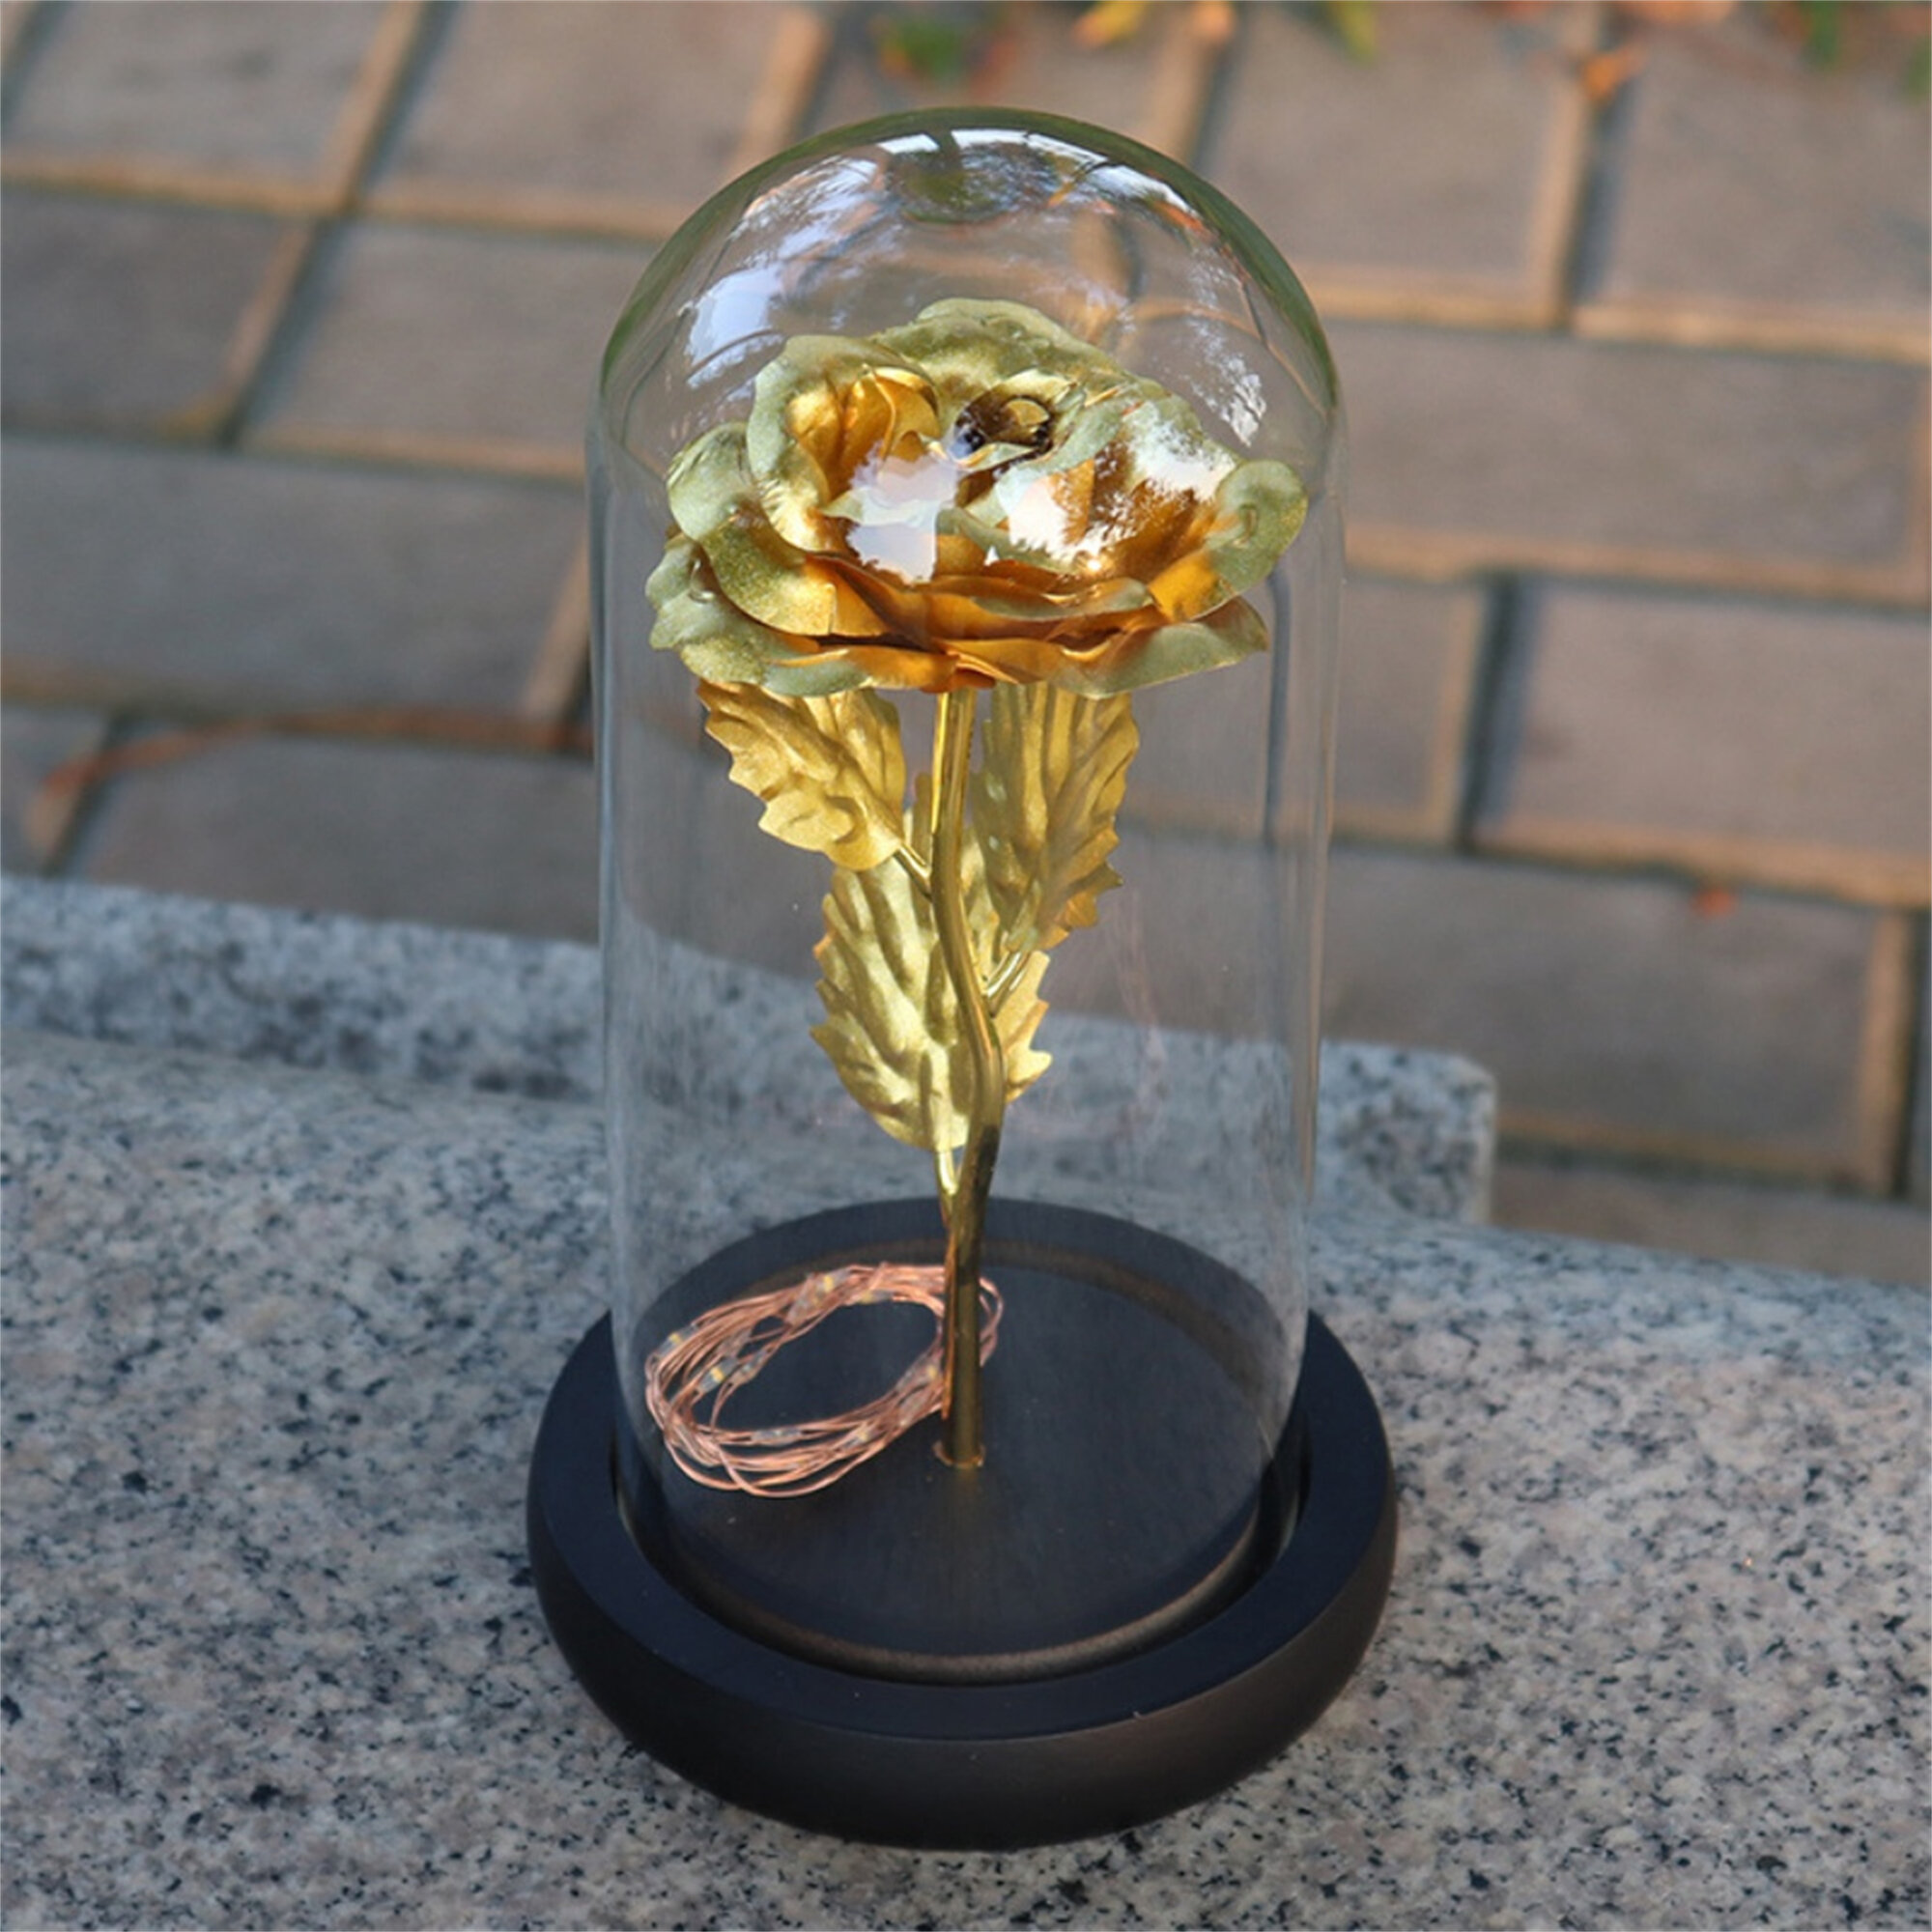 Romantic LED 24K Gold Foil Rose In Glass Dome Flower Light Mother's Day Gifts US